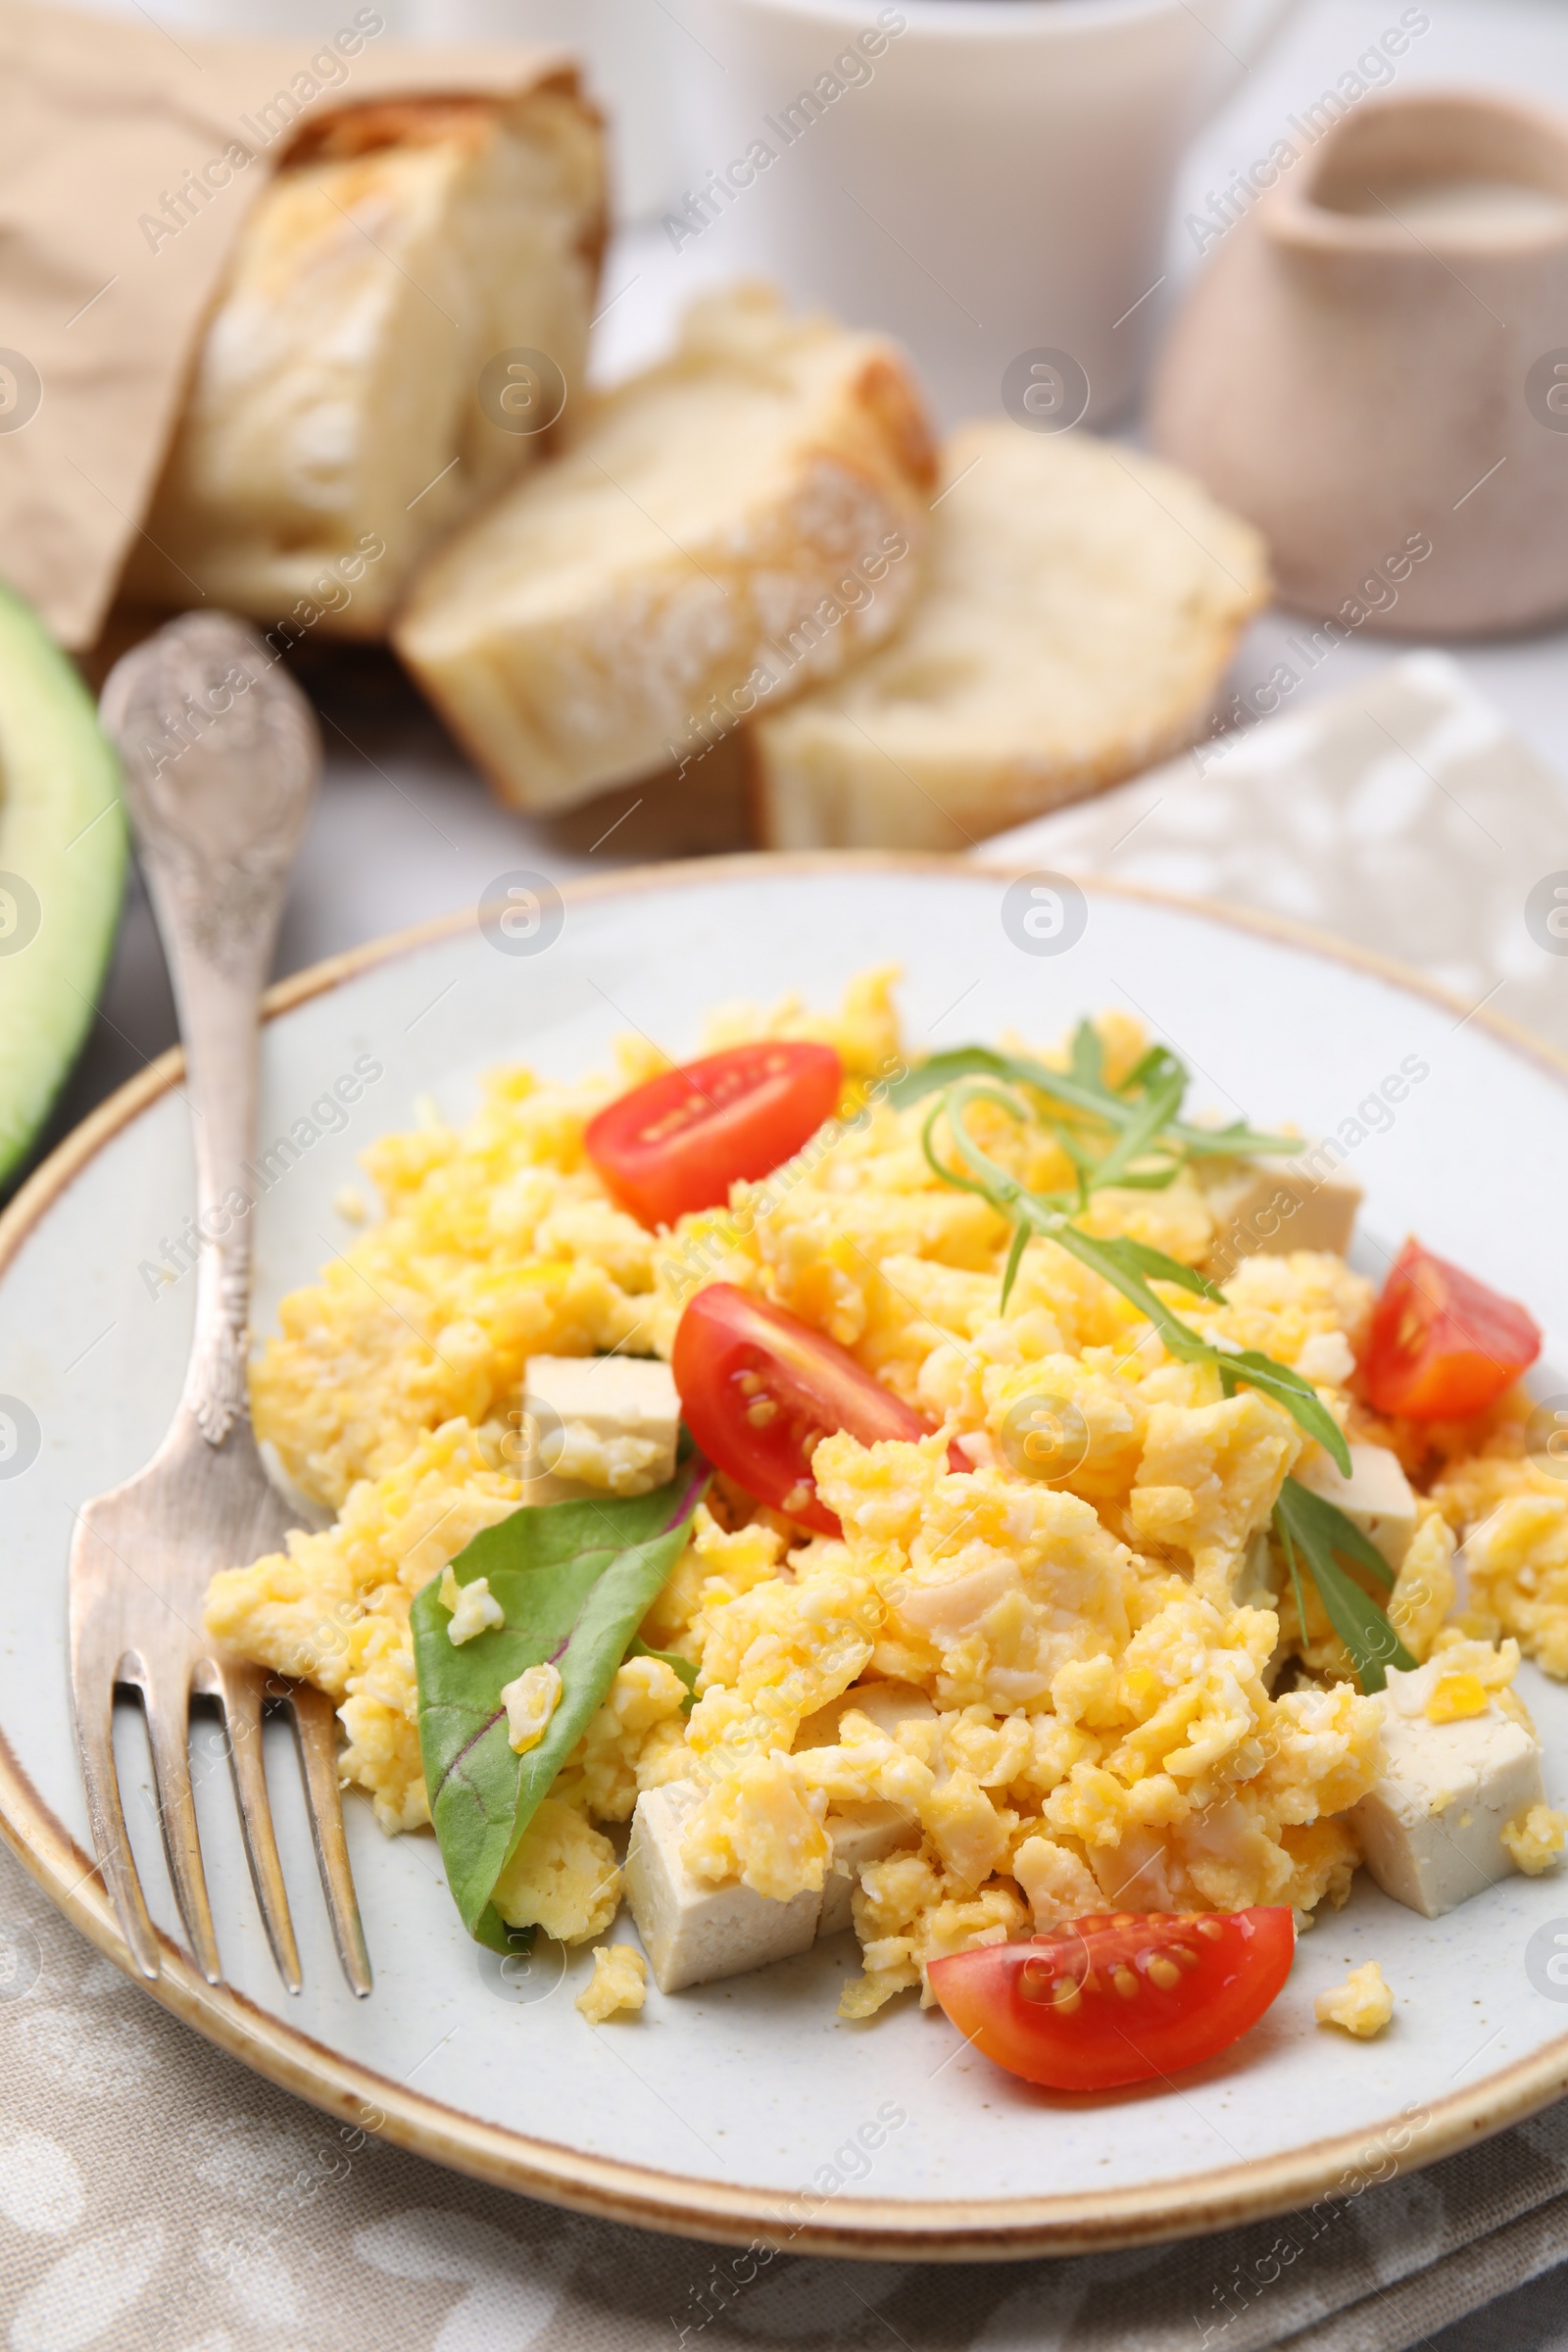 Photo of Plate with delicious scrambled eggs, tofu and tomatoes on table, closeup